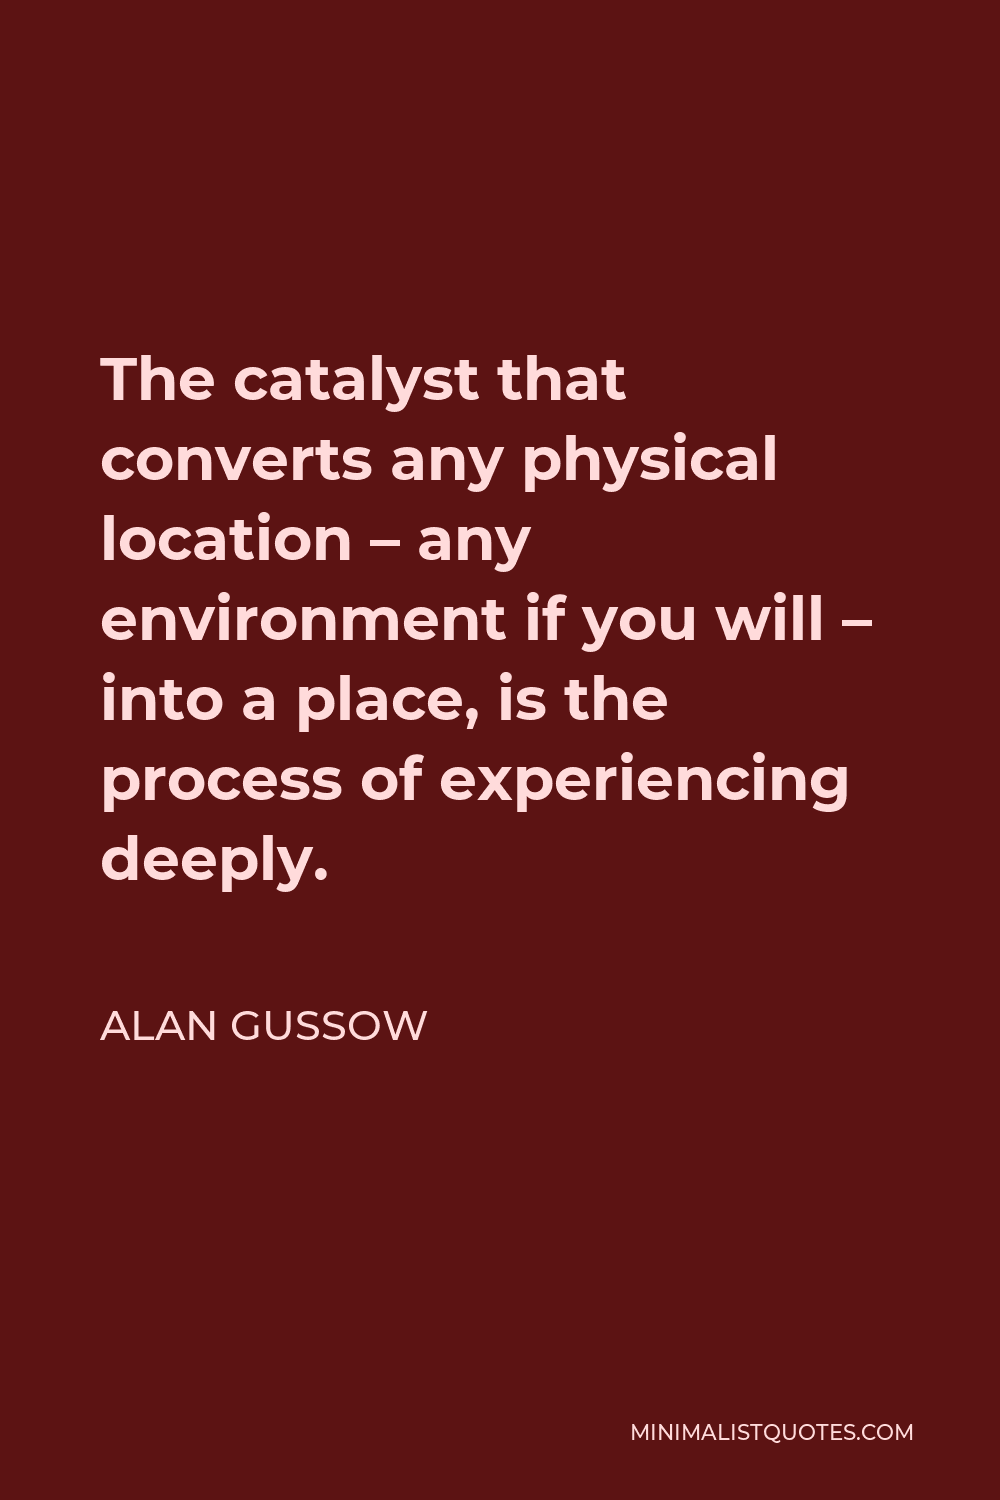 Alan Gussow Quote - The catalyst that converts any physical location – any environment if you will – into a place, is the process of experiencing deeply.